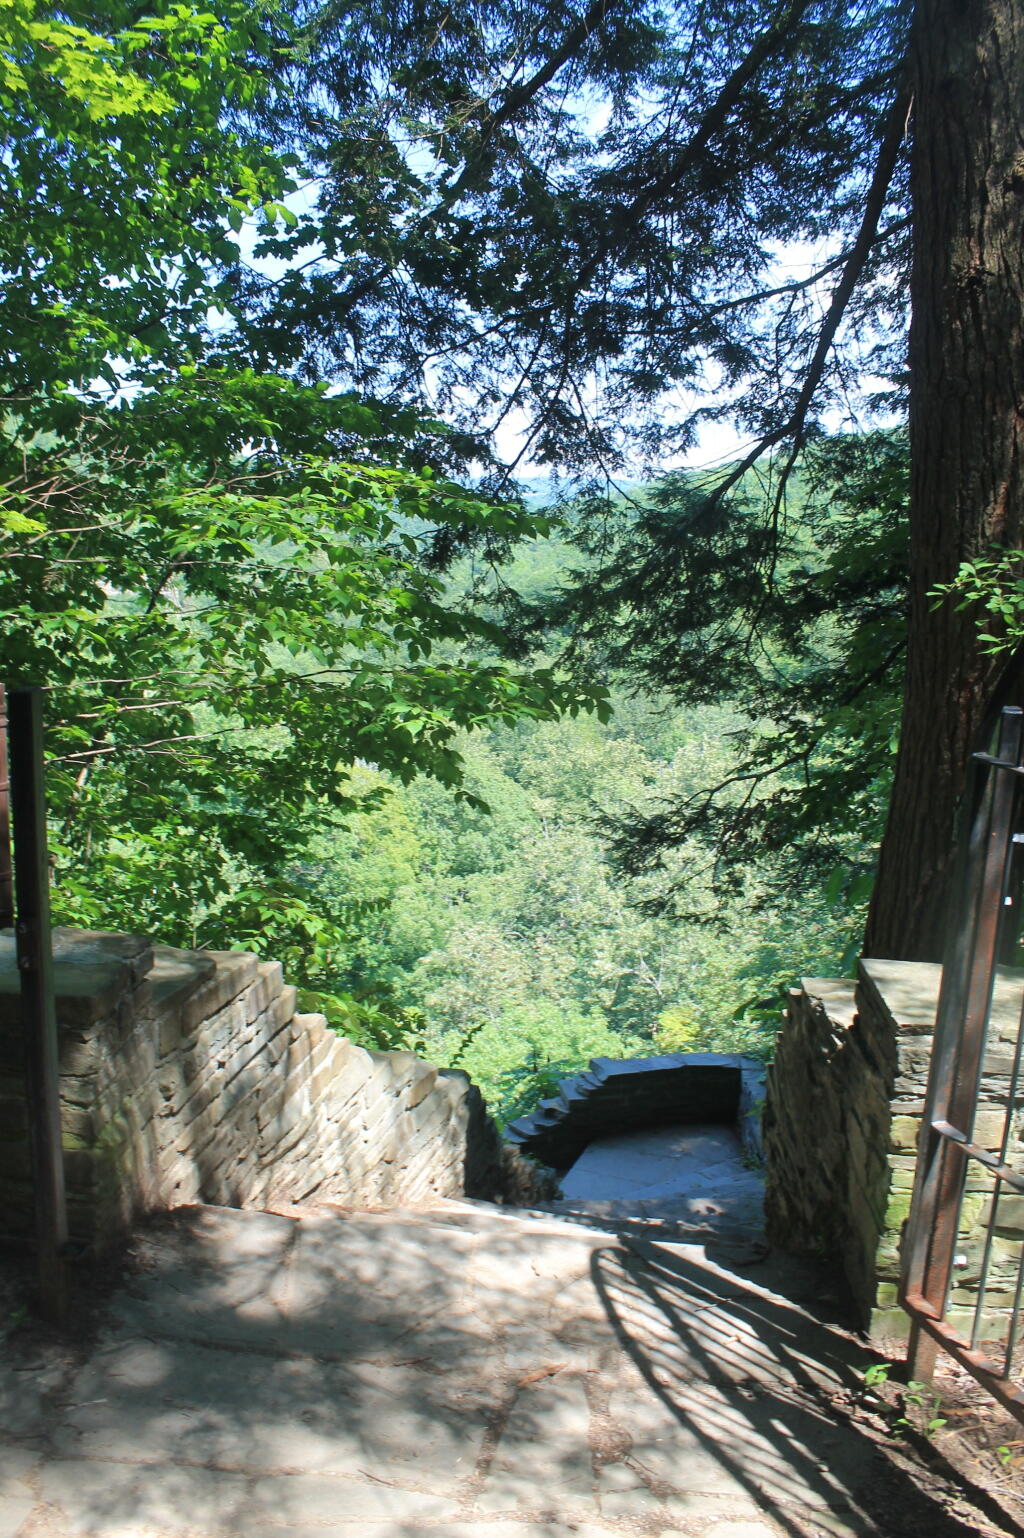 Start of Cliffside Stairs